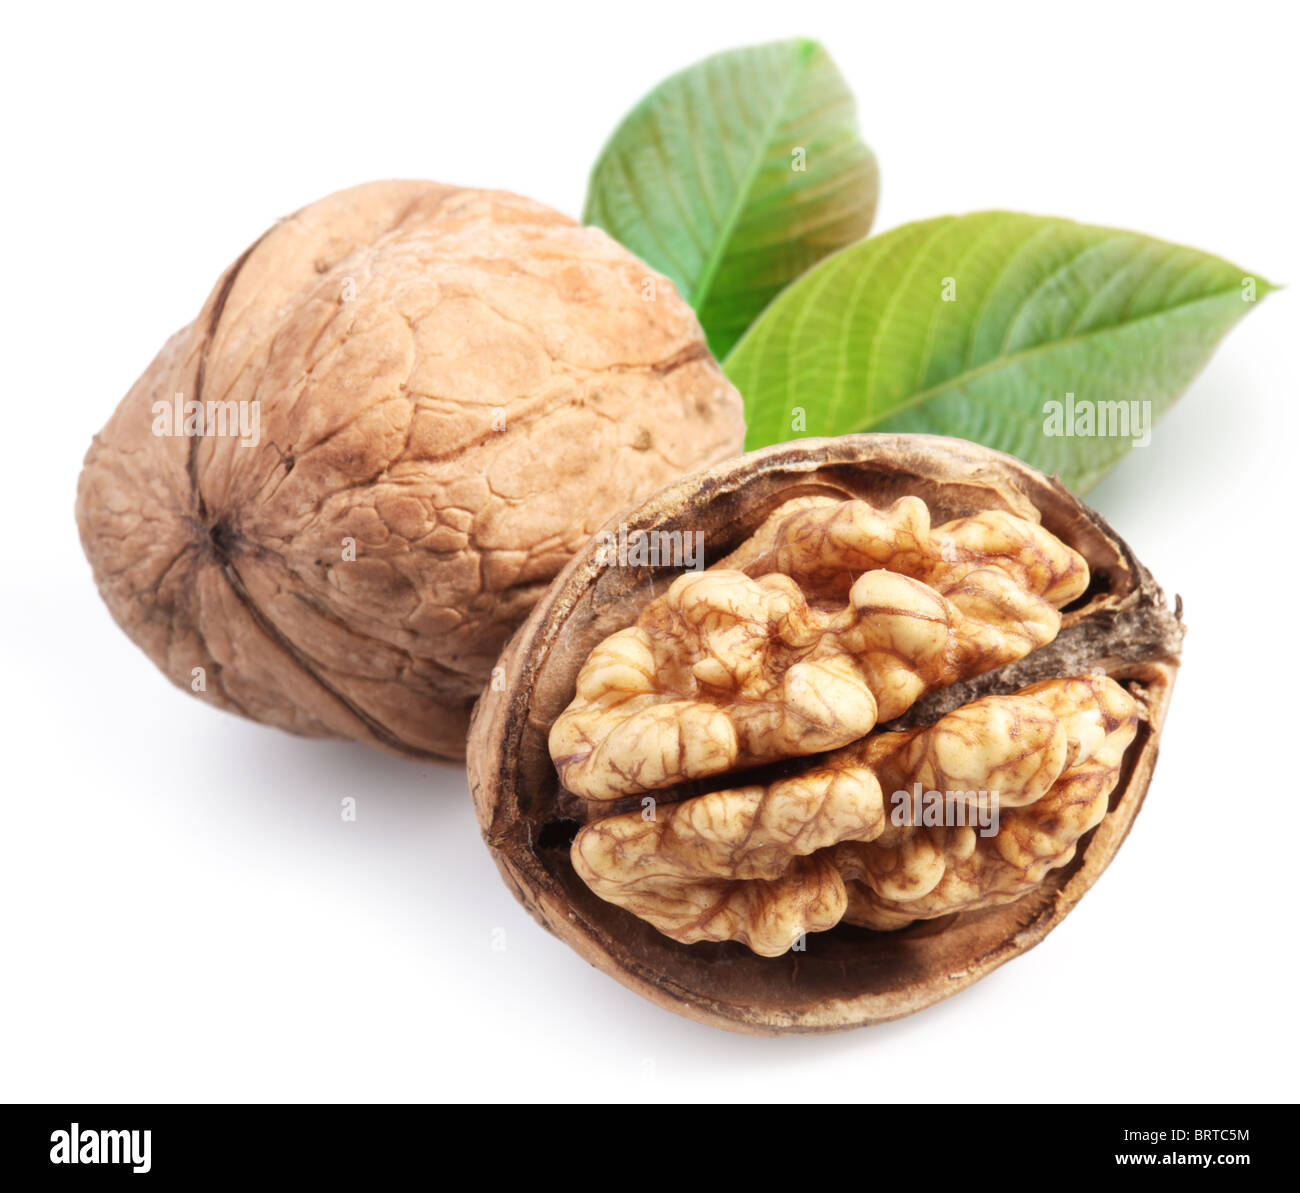 Walnuts with leaves. Stock Photo